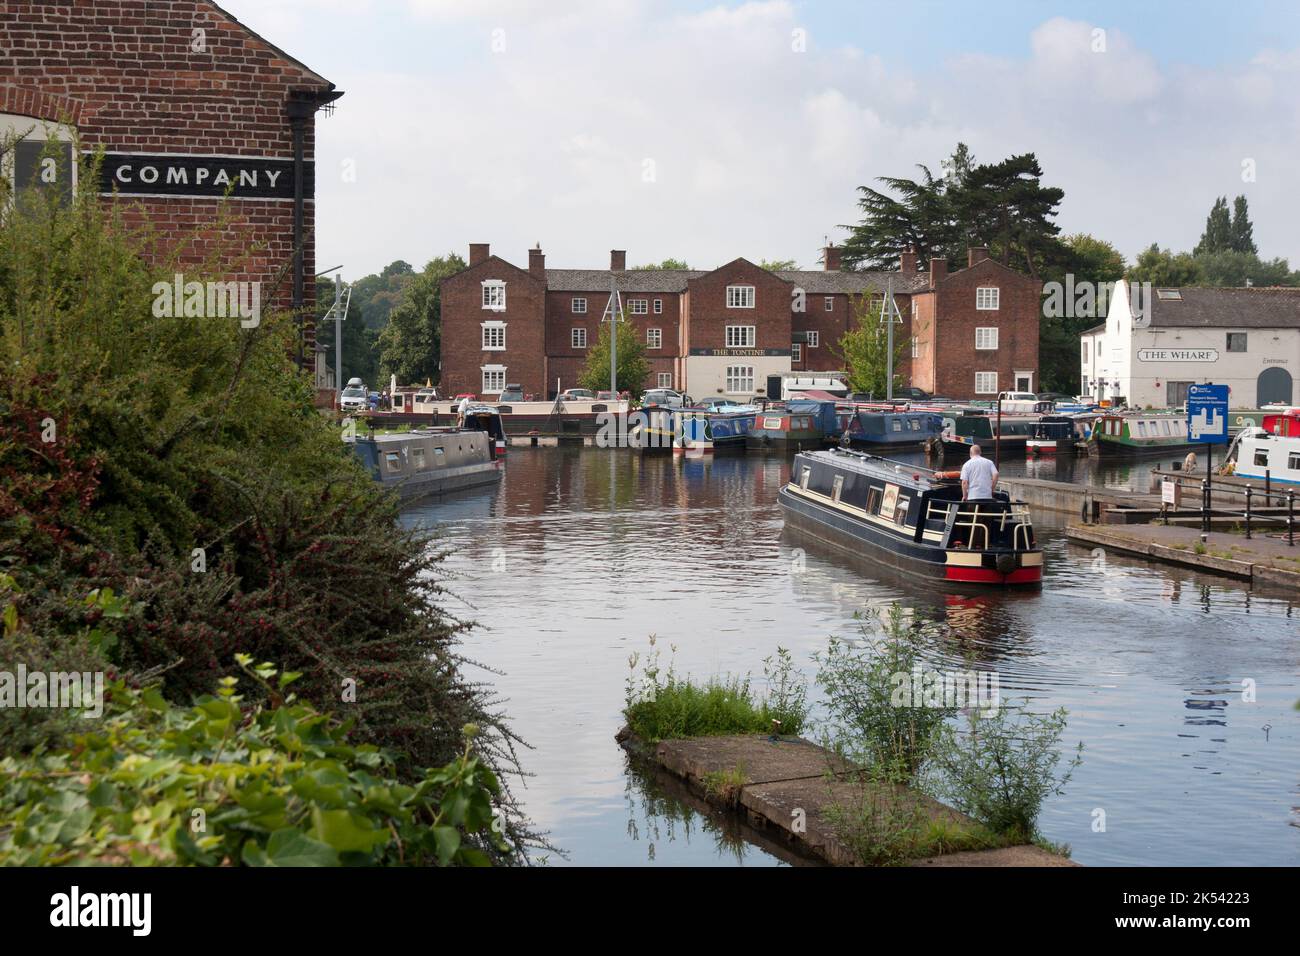 Stourport sul molo del canale Severn, bacino del canale, Stourport Ring, Staffordshire & Worcestershire Canal, Worcs, Inghilterra Foto Stock